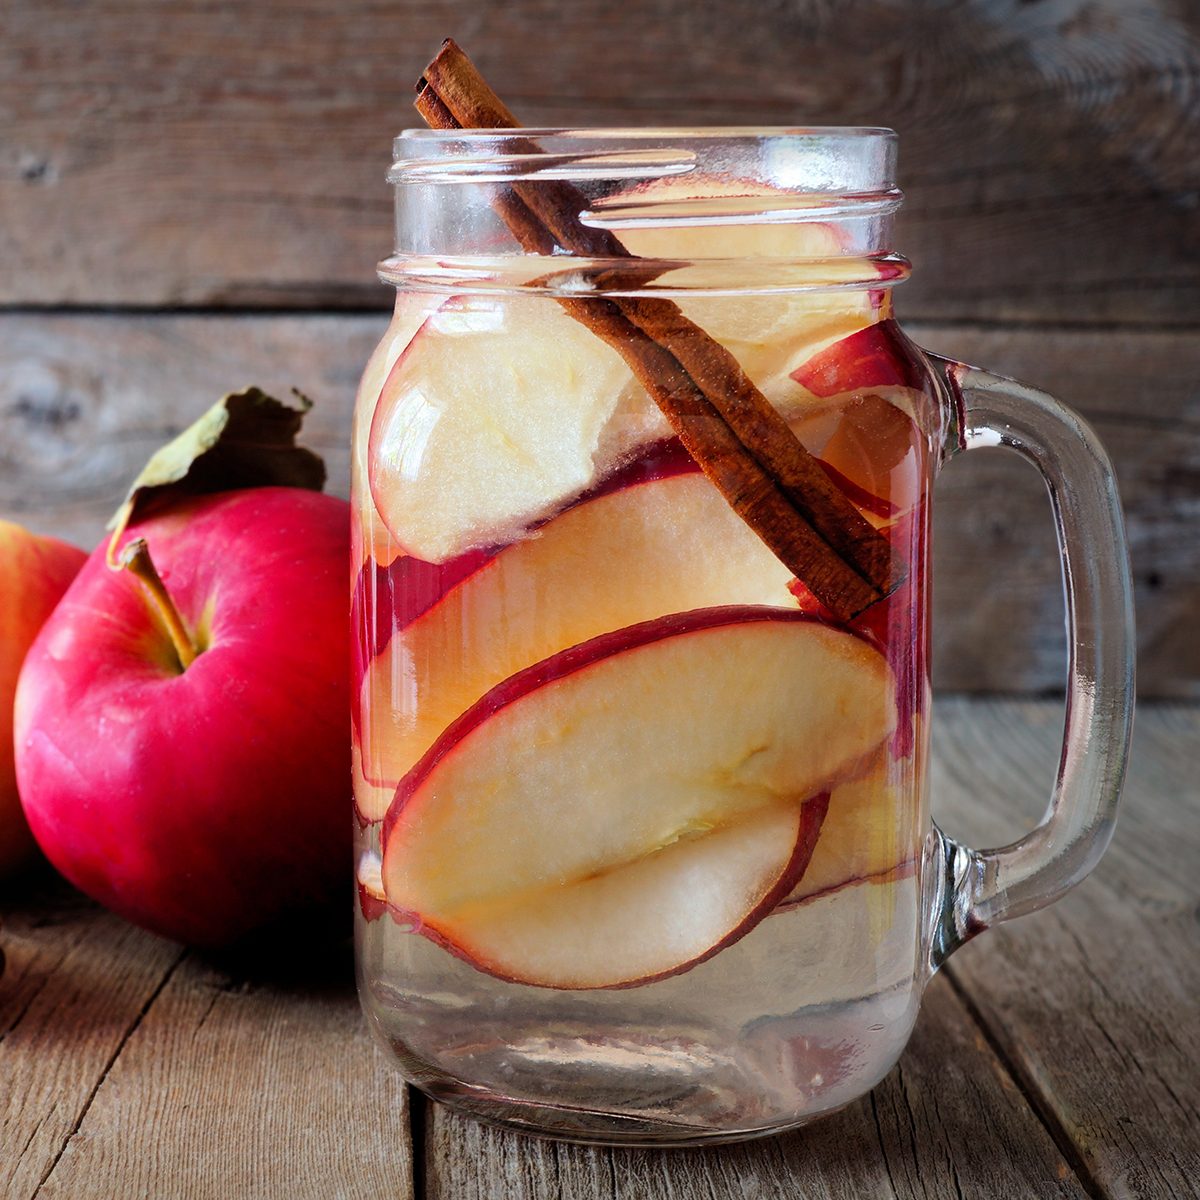 The 23 Best Flavored Water Recipes of All Time